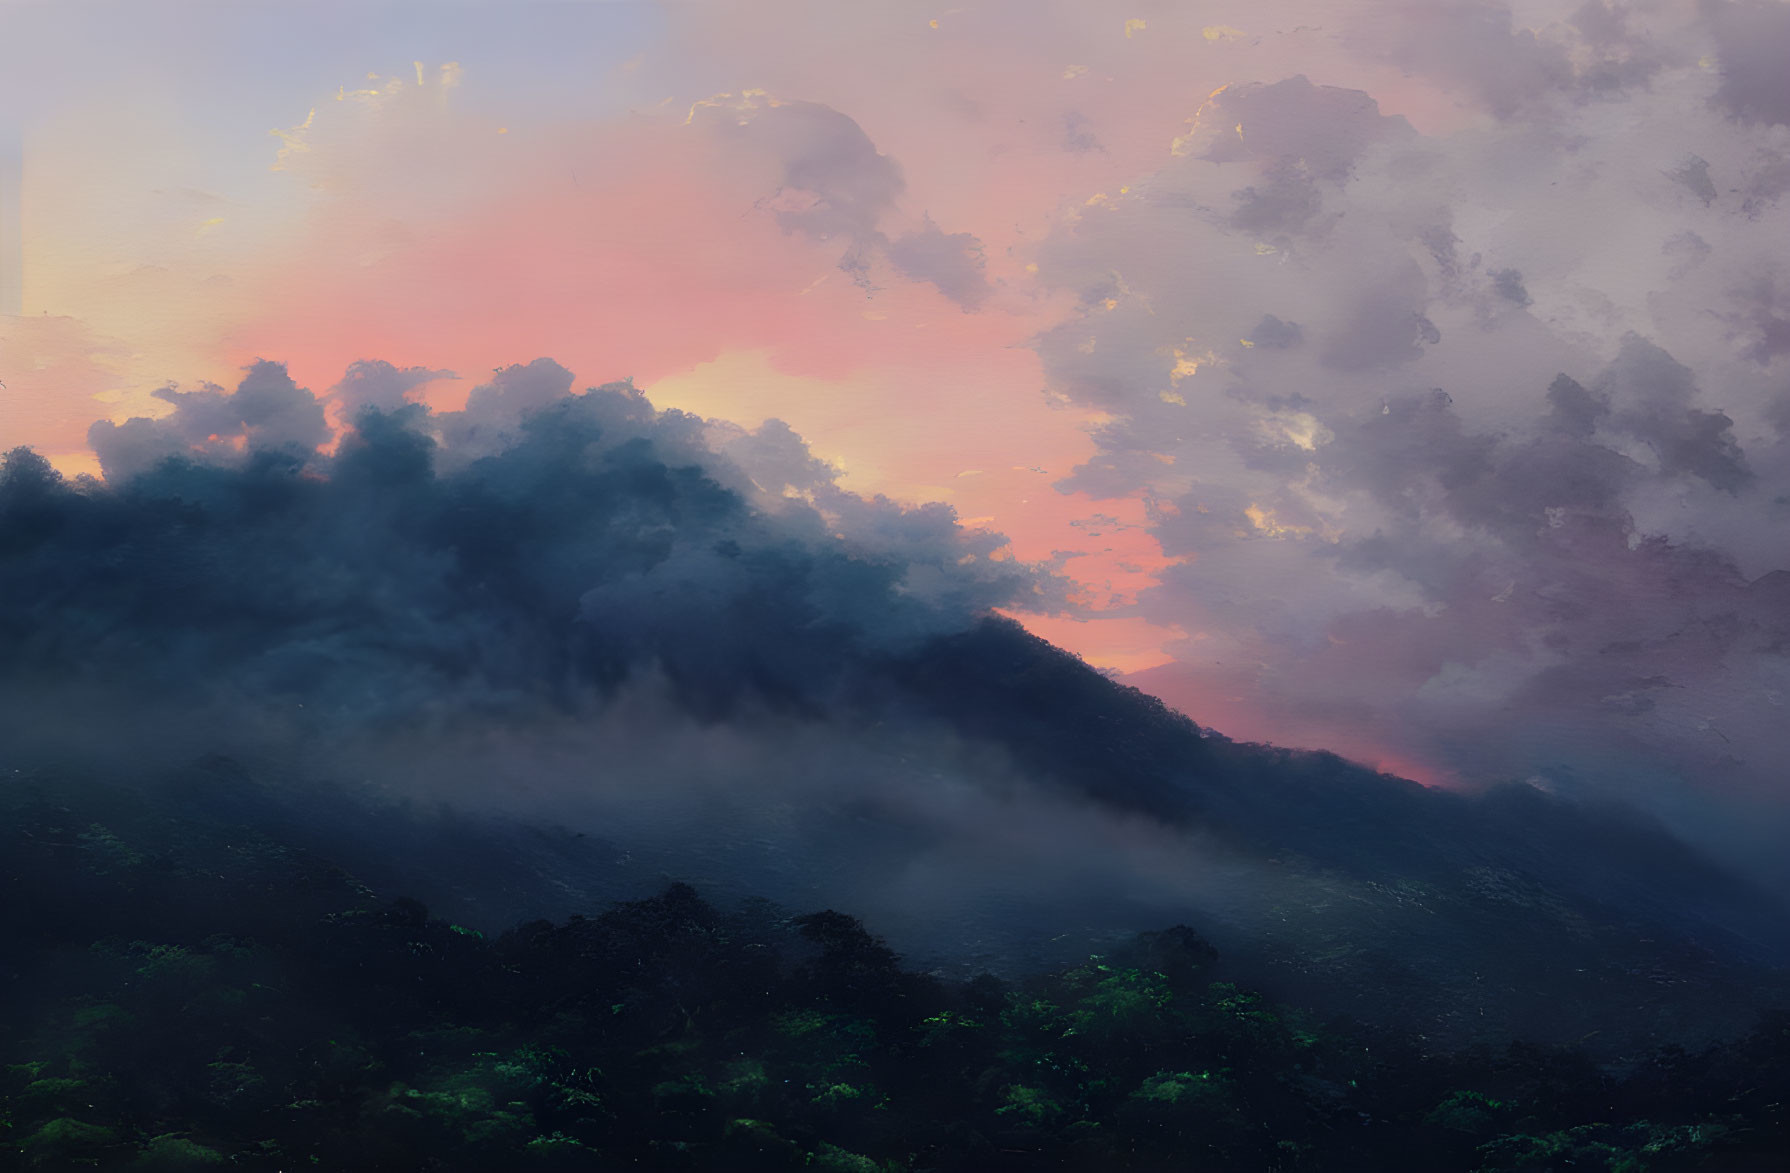 Majestic landscape: mist-covered mountain with colorful sunset/sunrise clouds